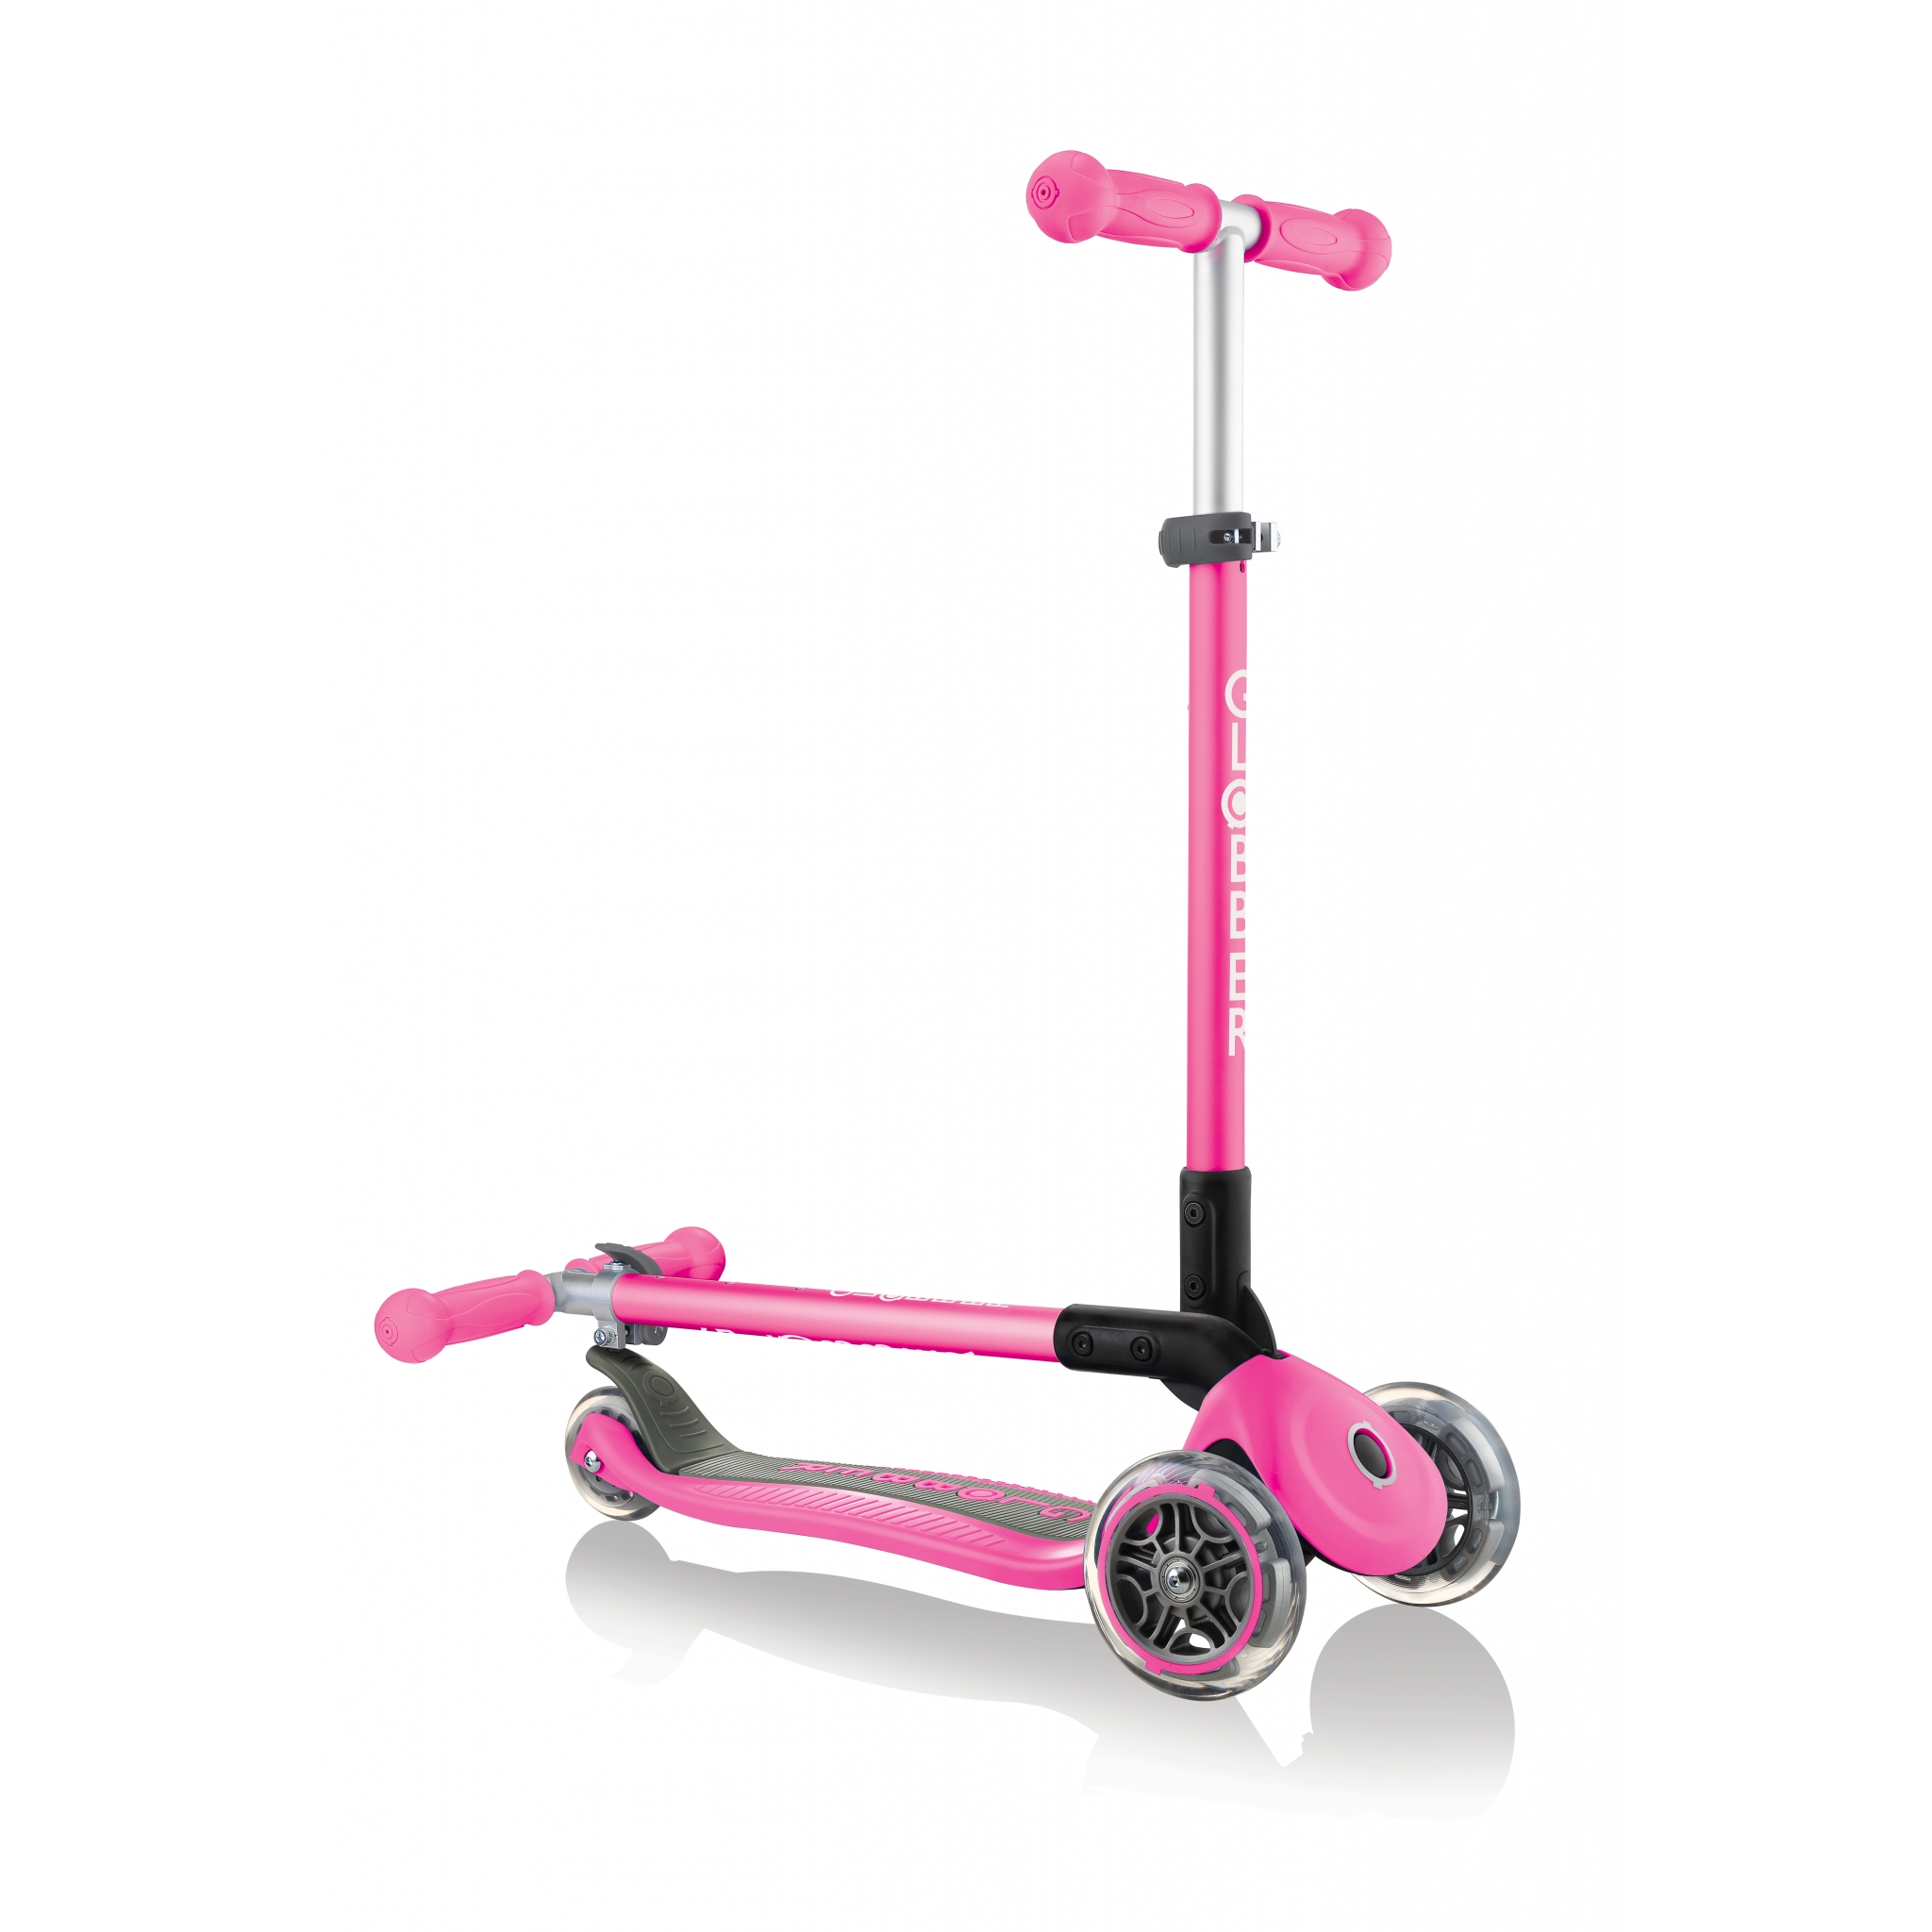 PRIMO-FOLDABLE-3-wheel-fold-up-scooter-for-kids-neon-pink 0